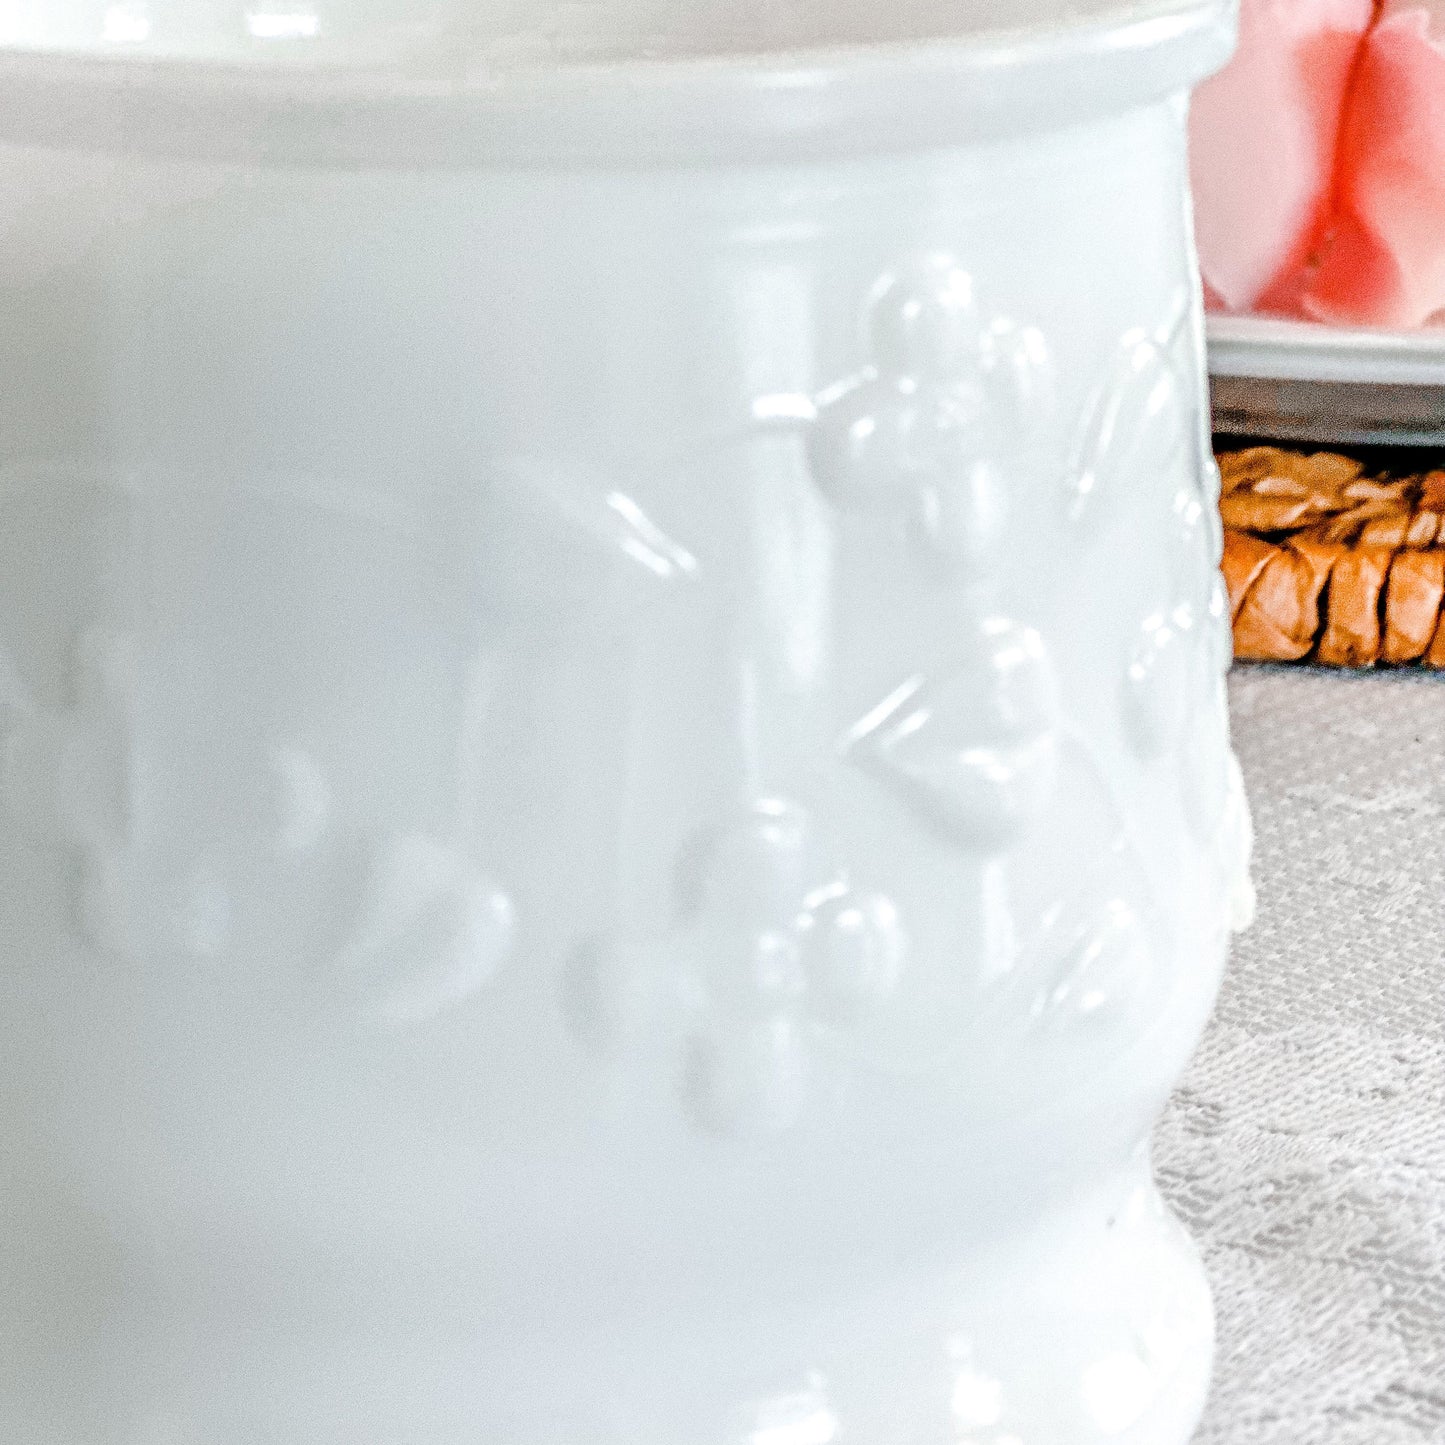 Scented Candle in Vintage Milk Glass Planter